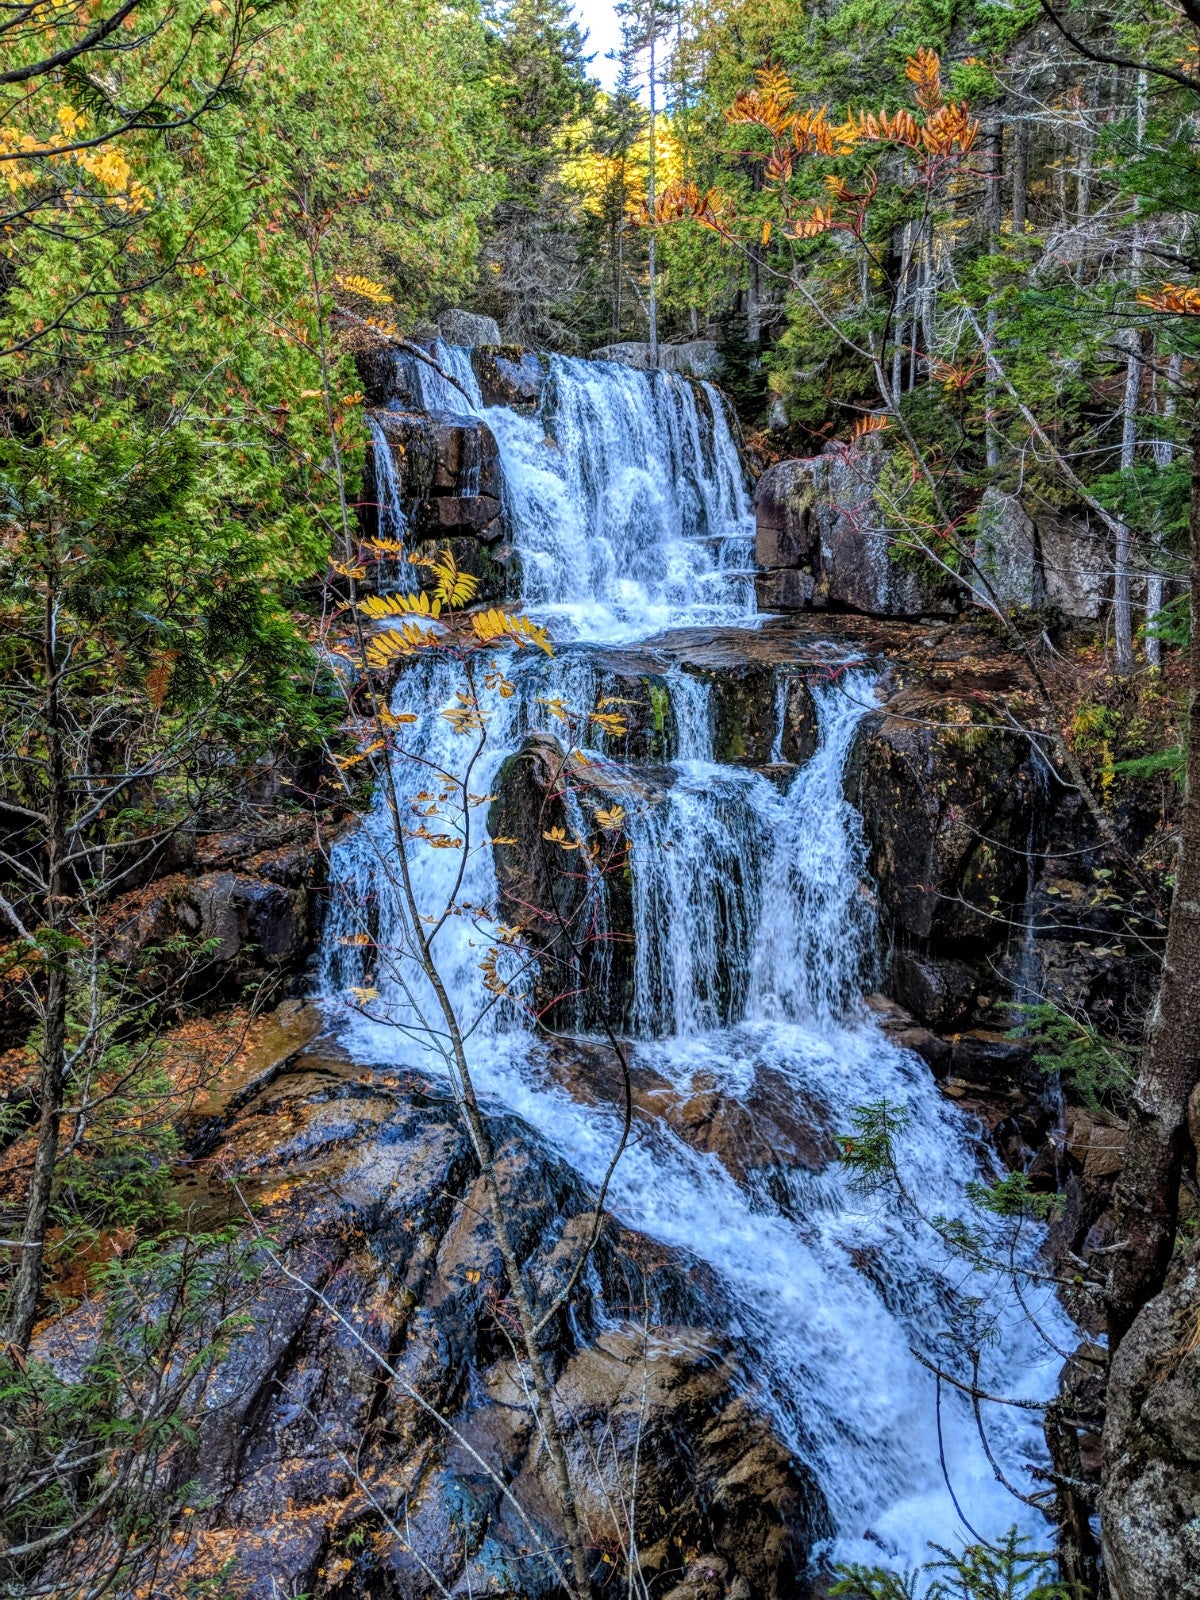 Even if you don't make it to the top of Katahdin, the hike up to the waterfall is worth it!